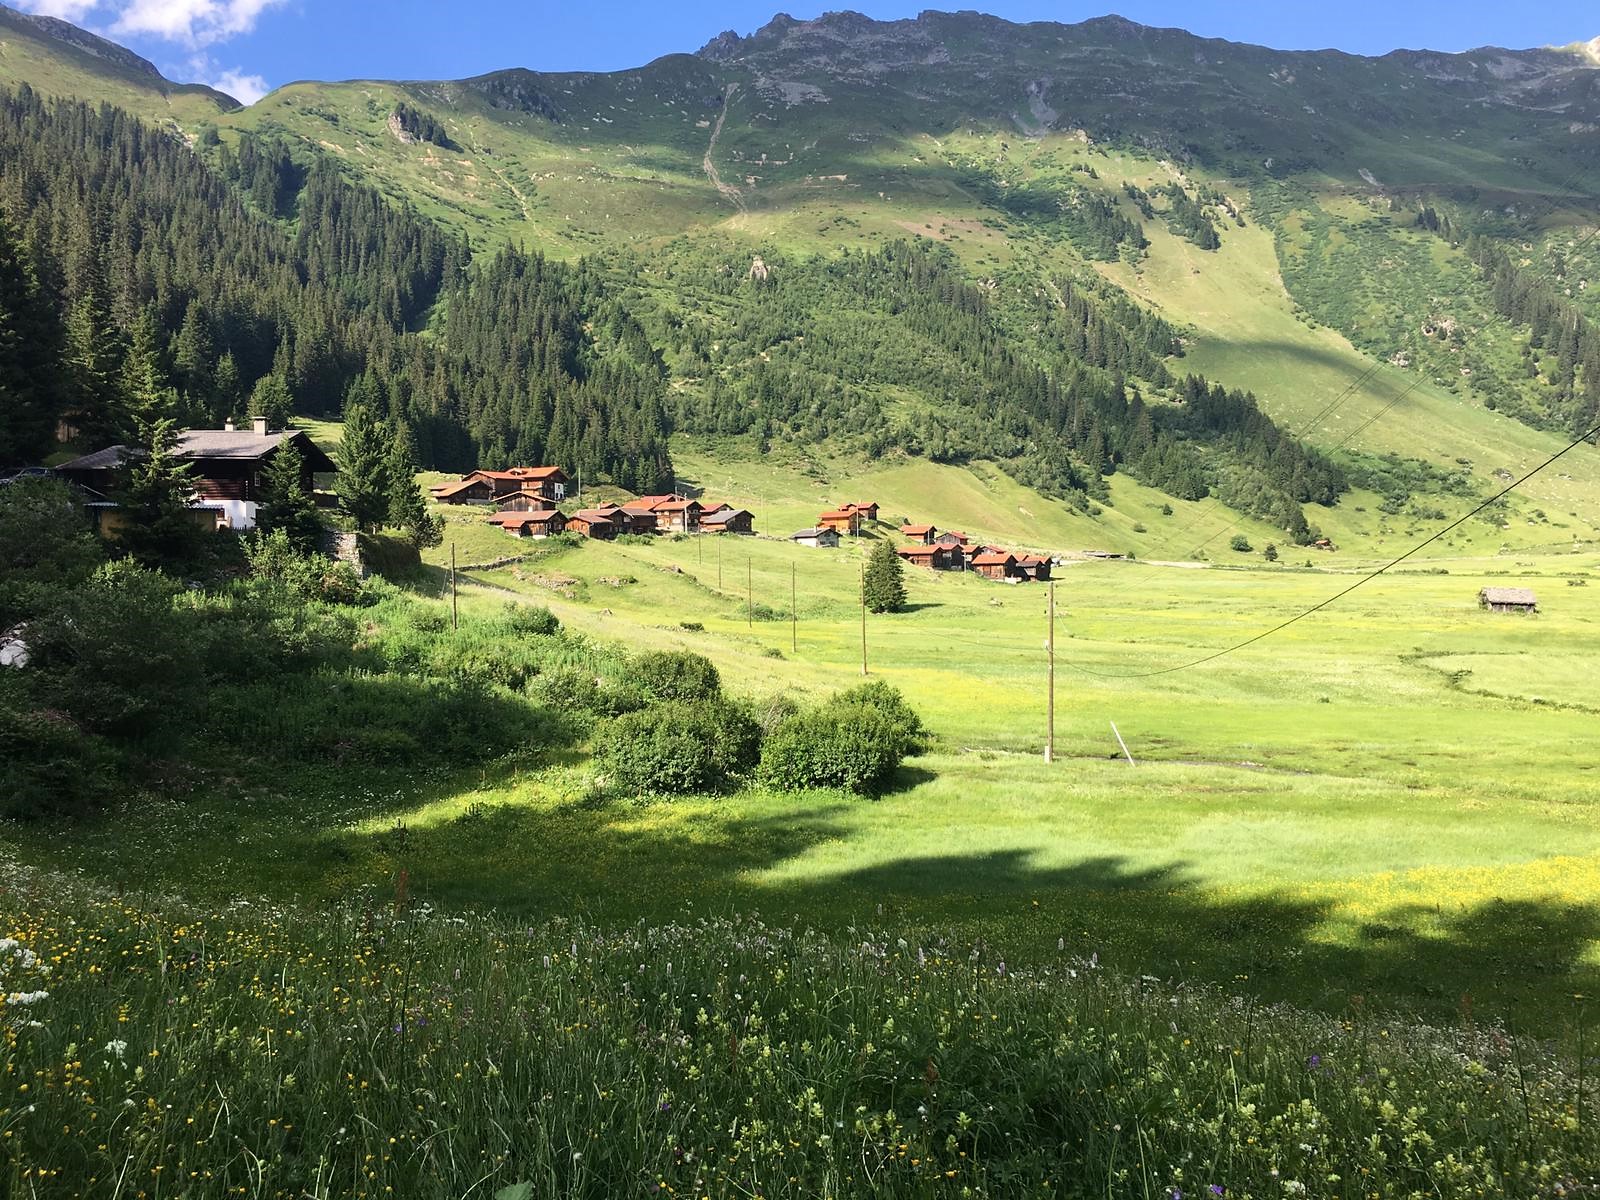 Summer in the Alps 2019 - Another Good Year